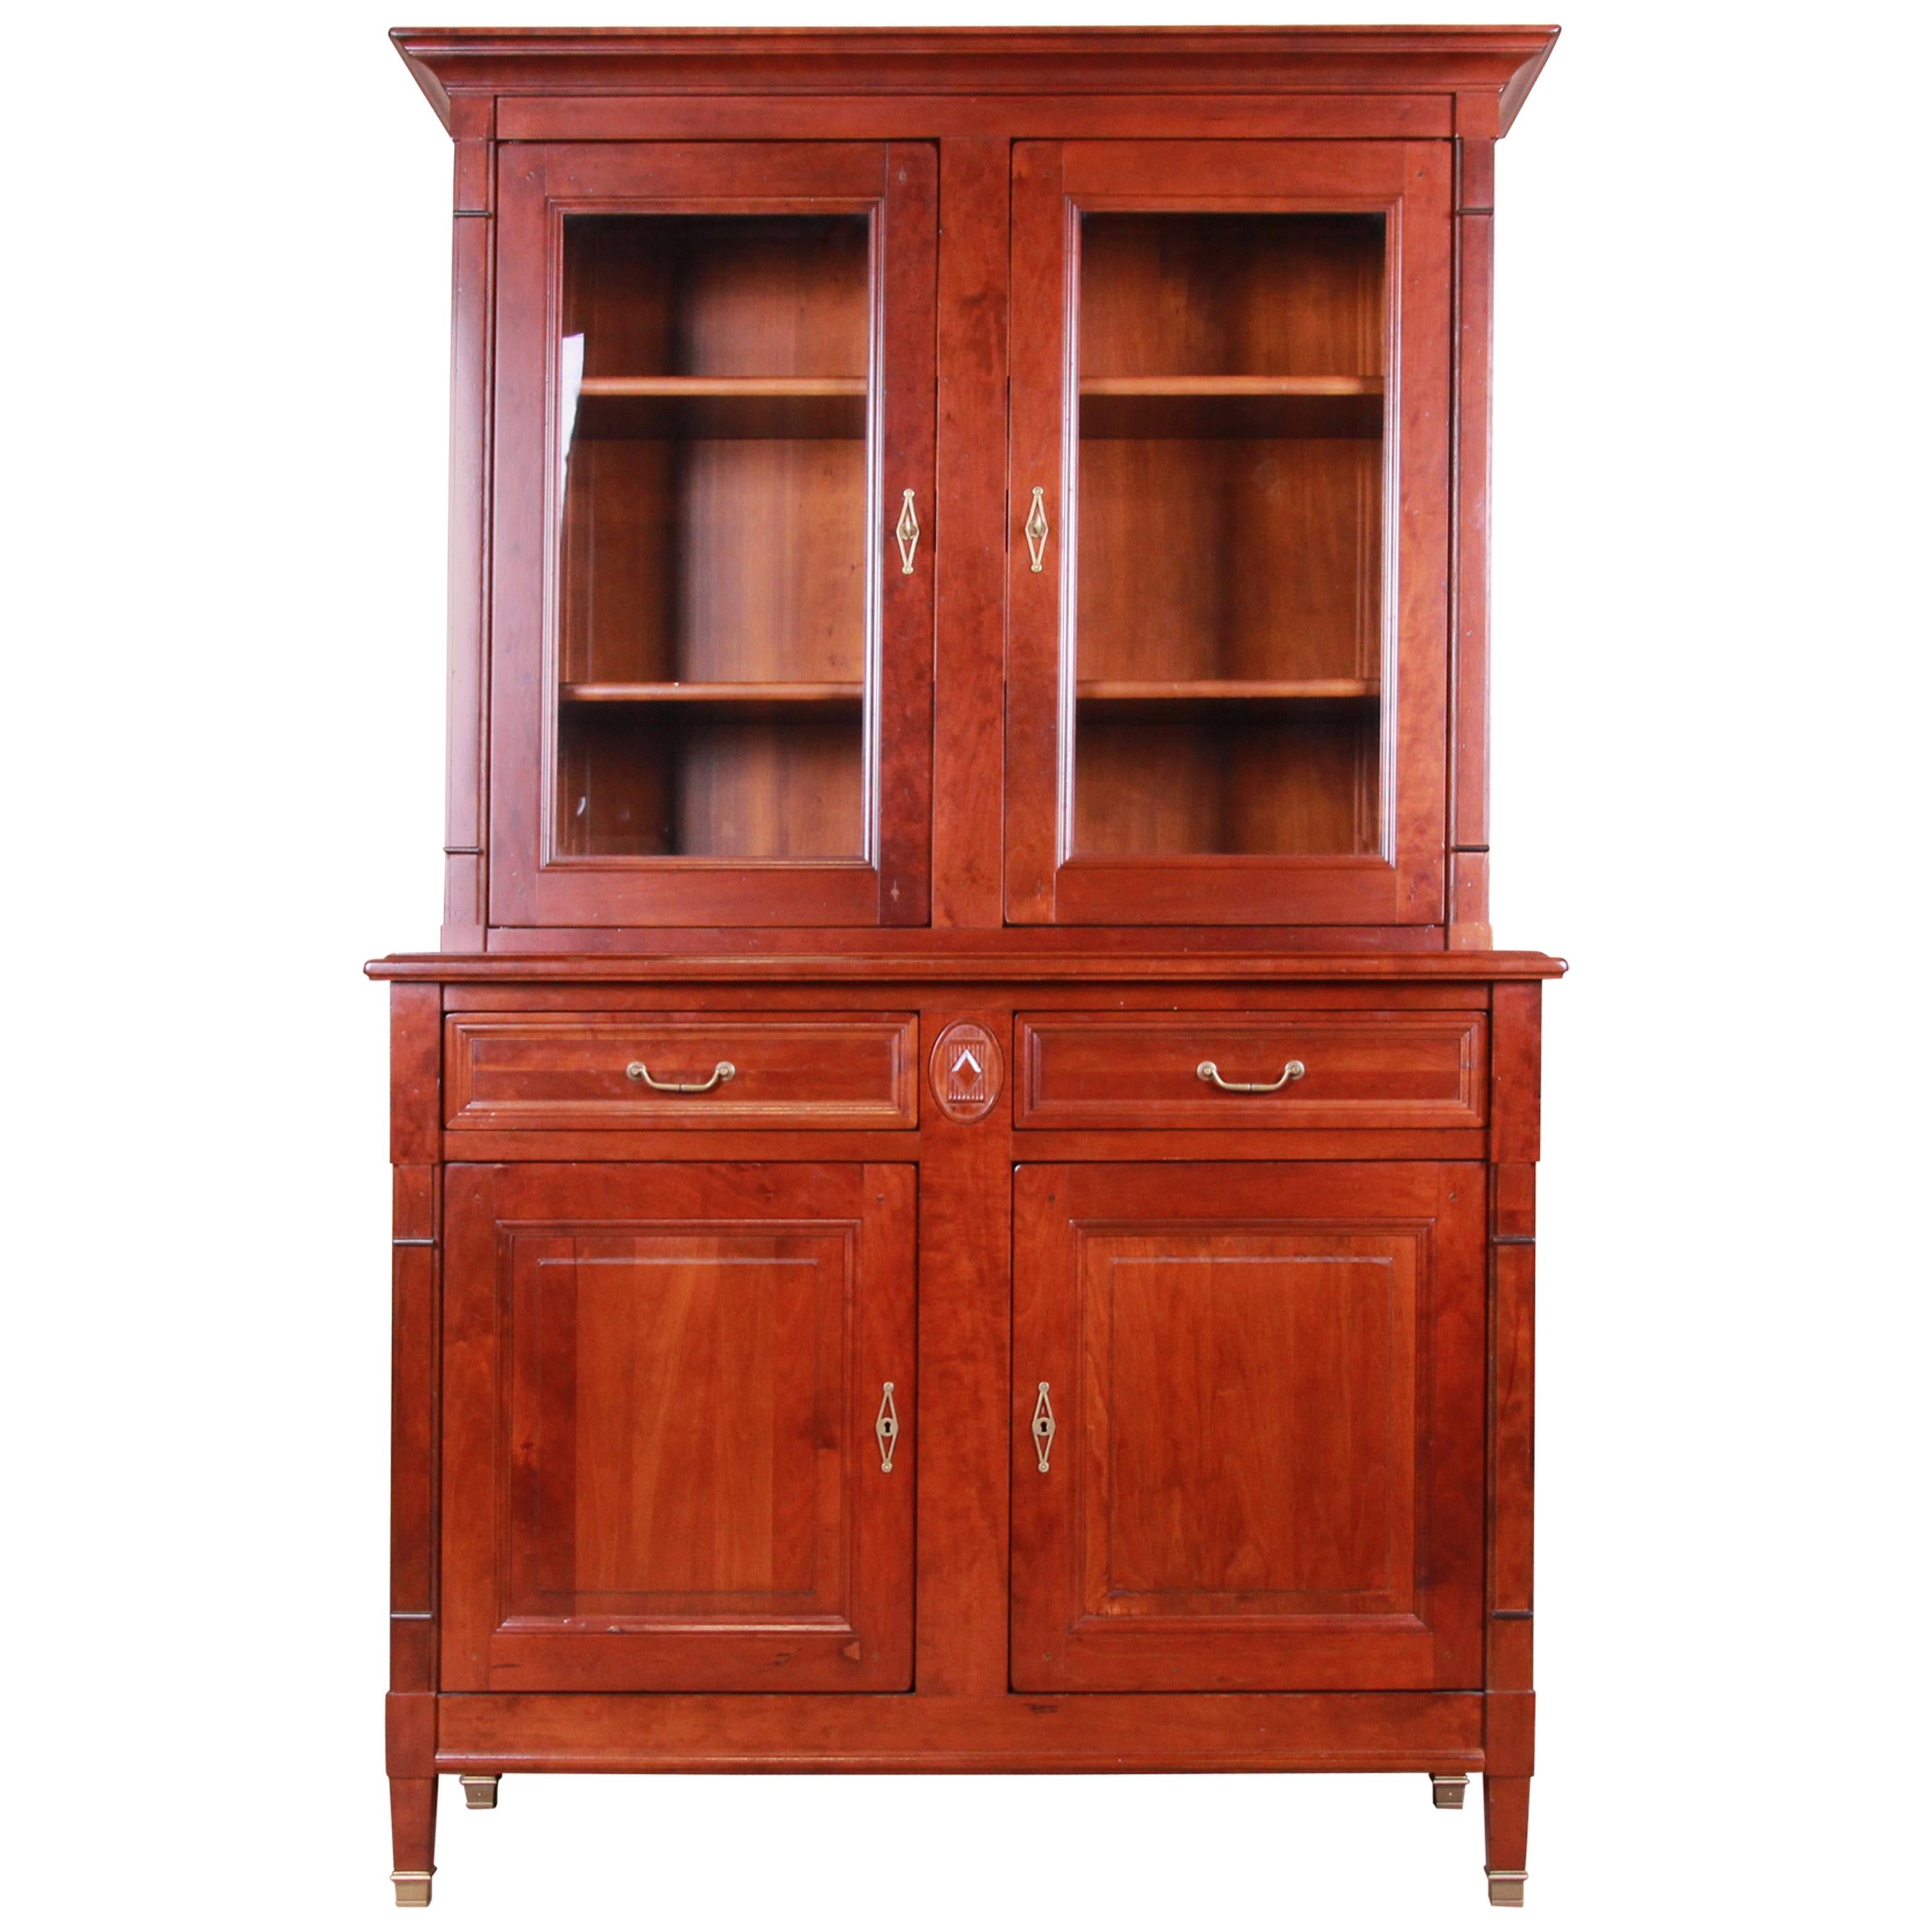 French Provincial Solid Cherry Breakfront Bookcase or Bar Cabinet by Grange